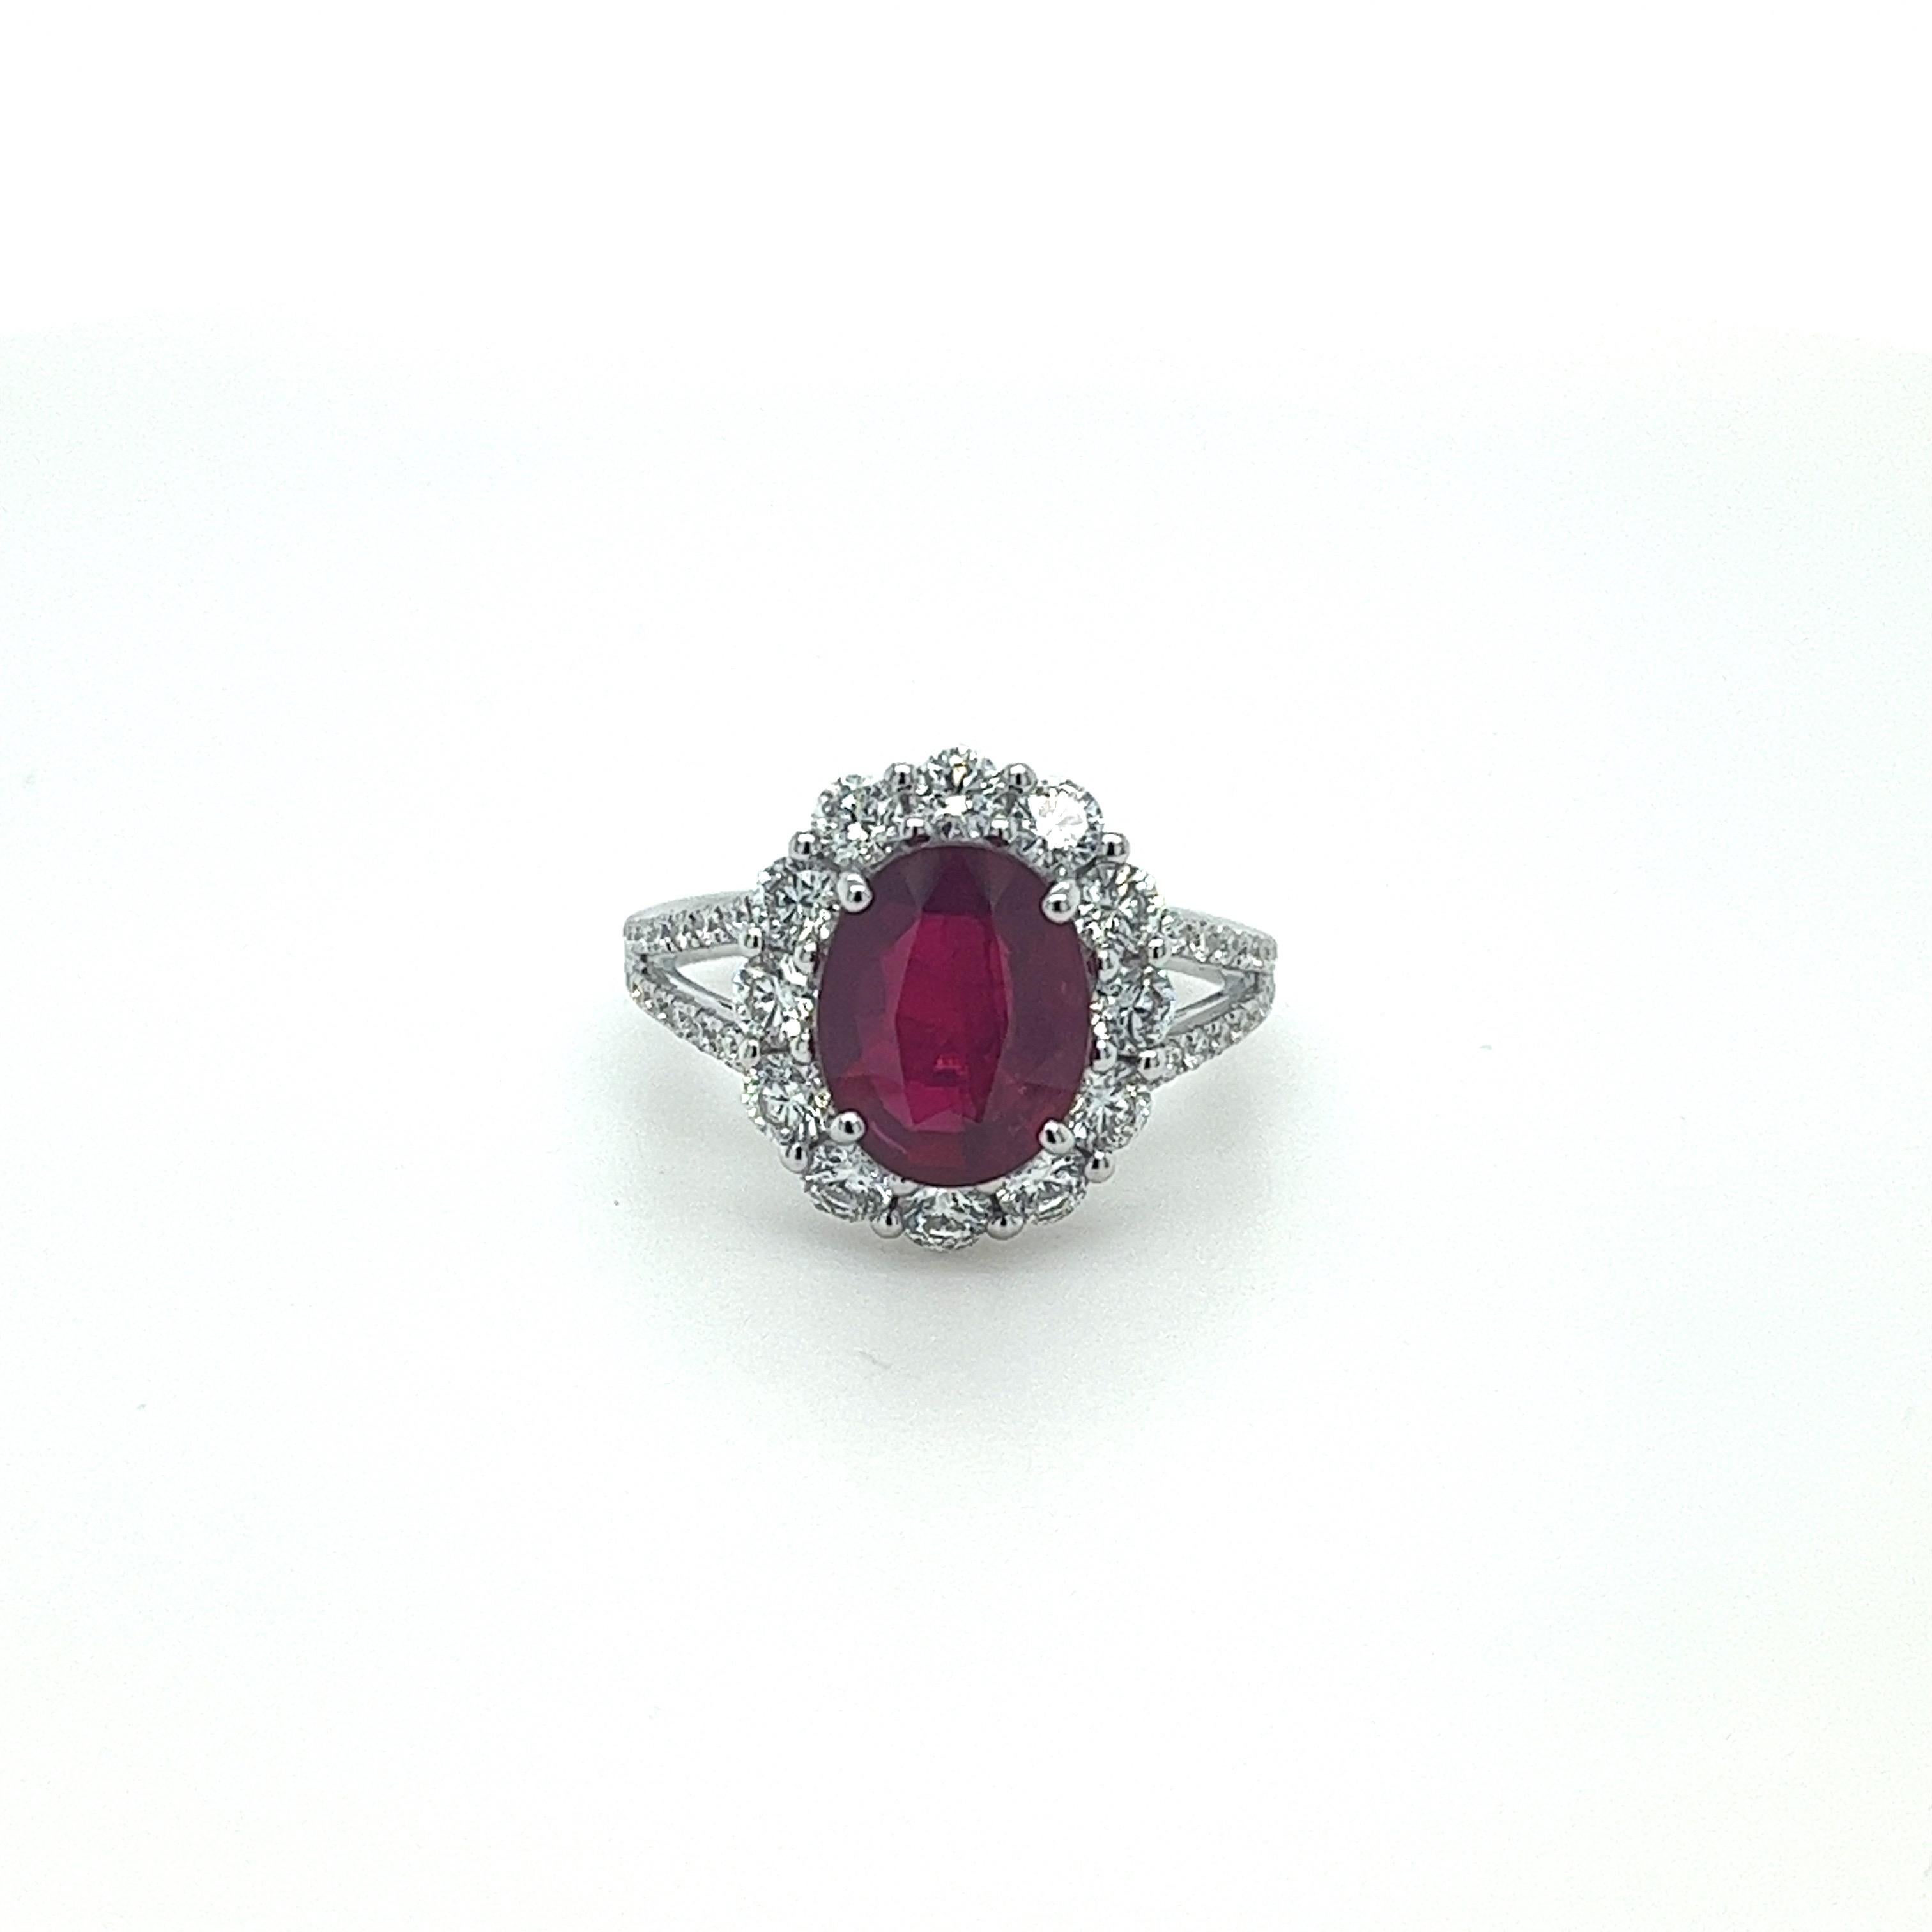 GIA Certified Oval Ruby weighing 3.01 carats
Measuring (9.89x7.80x3.91) mm
Diamonds weighing 1.20 carats
Diamond Quality: H-SI1
Set in 18k white gold ring
3.70 grams